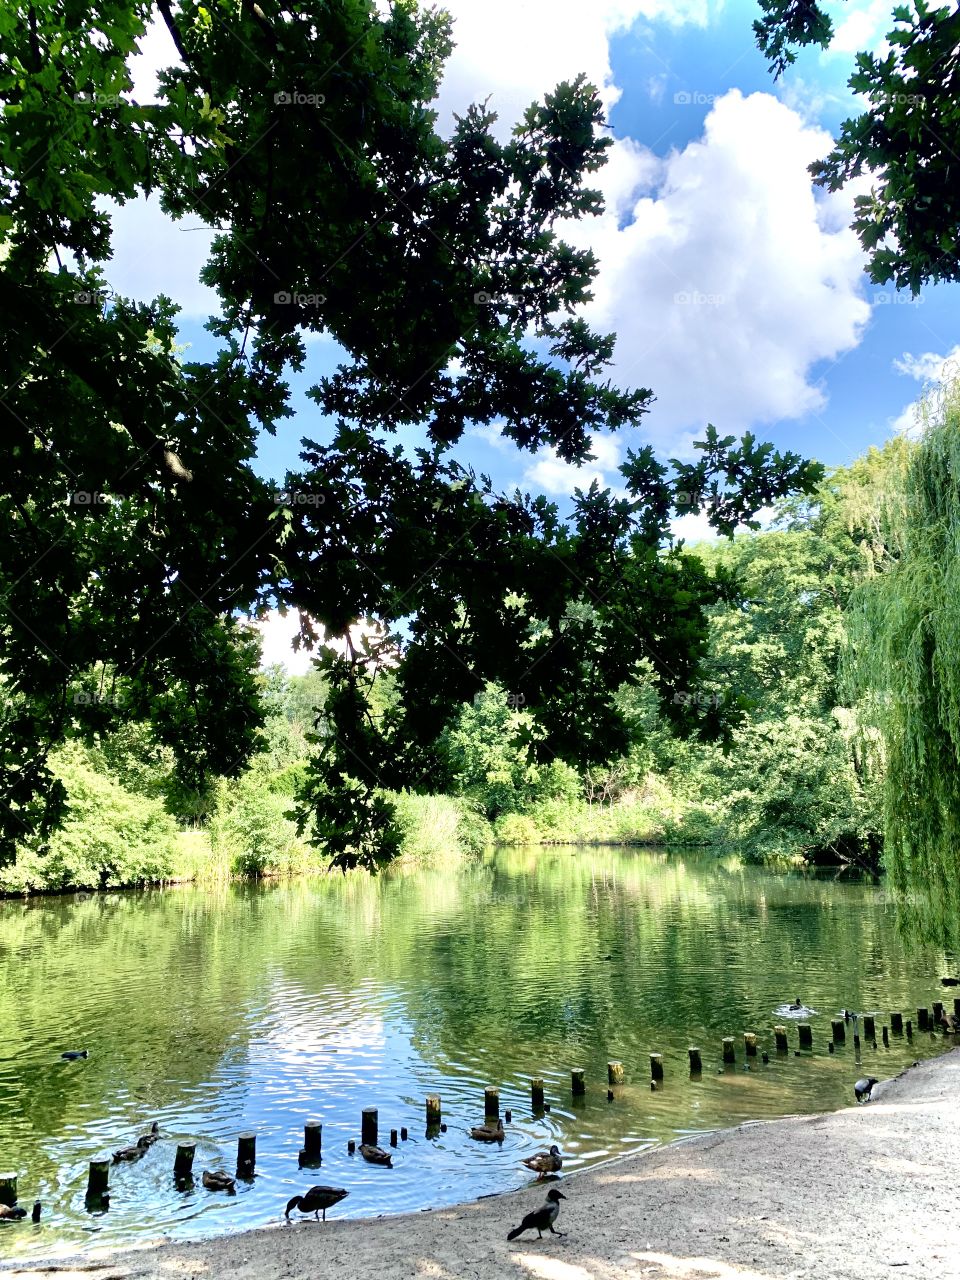 Park view in Berlin with a lake and ducks